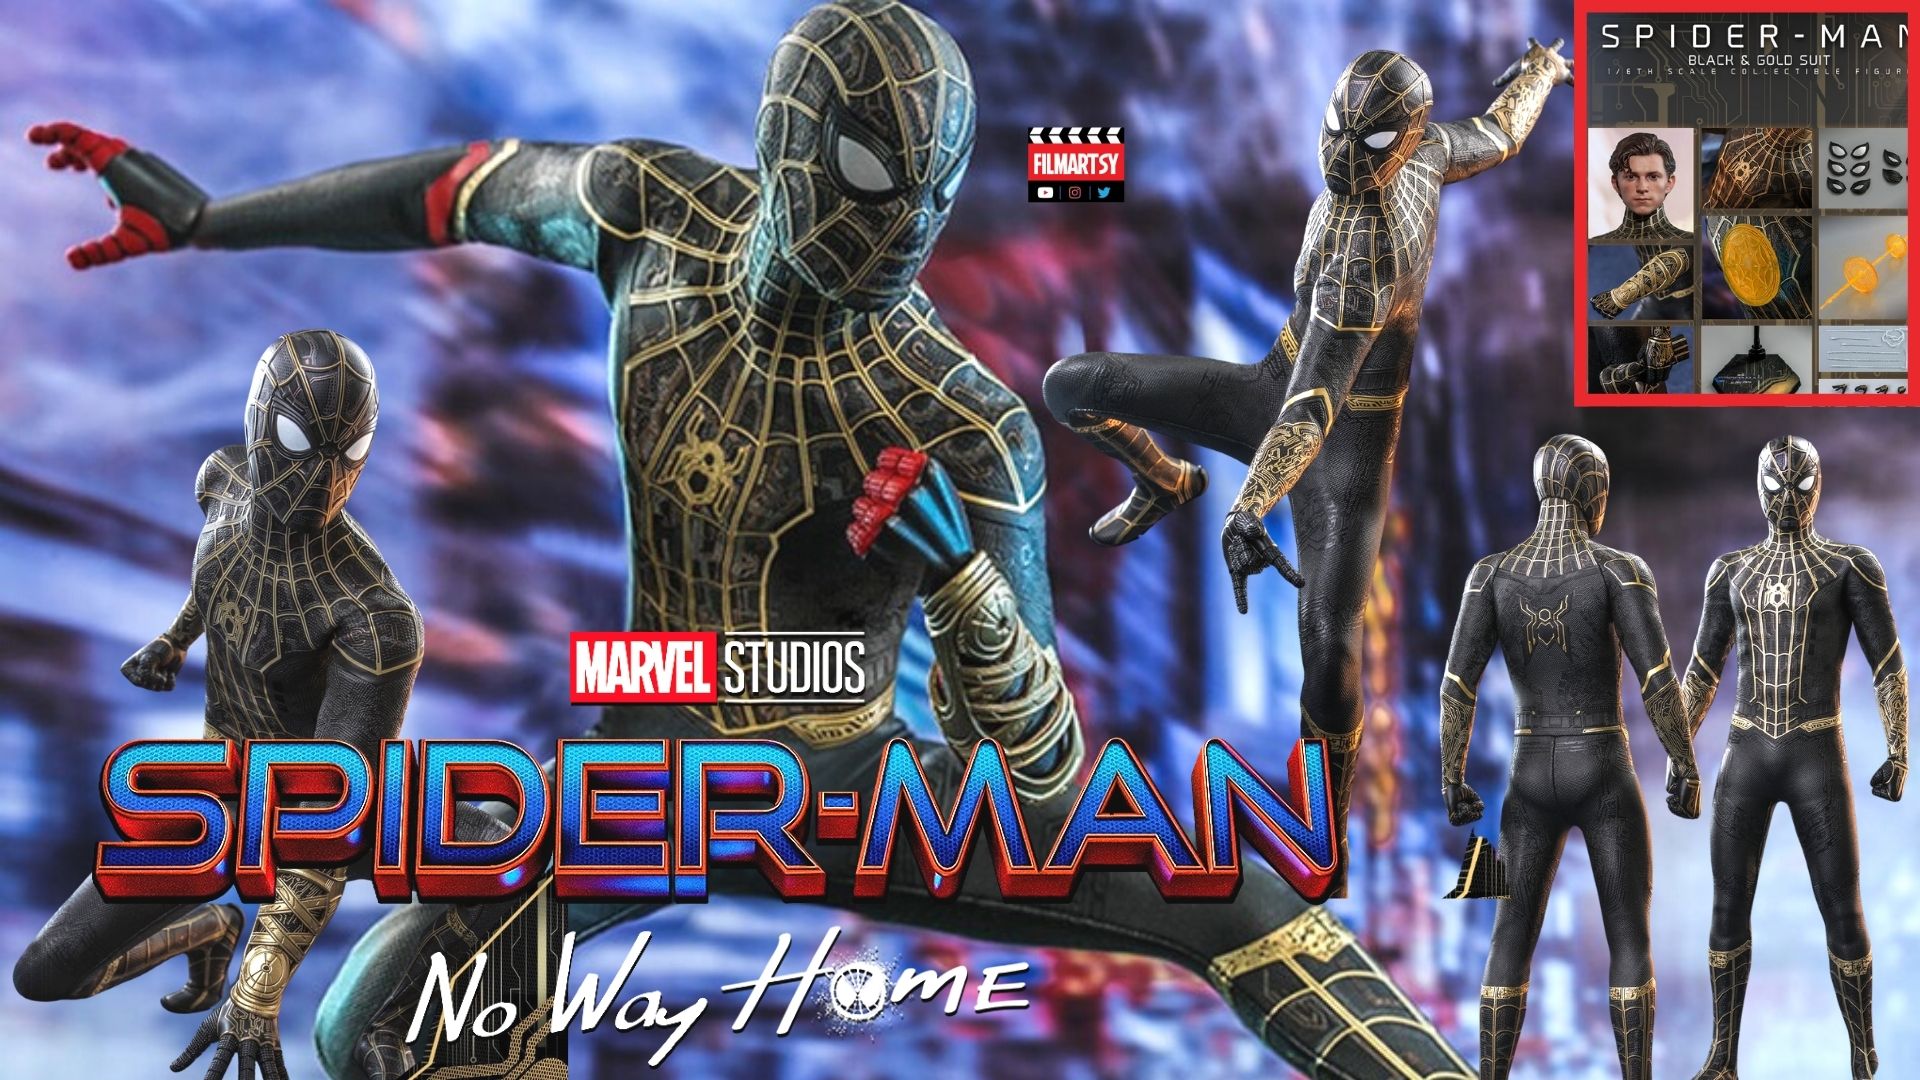 Spiderman no way home leaked set photos